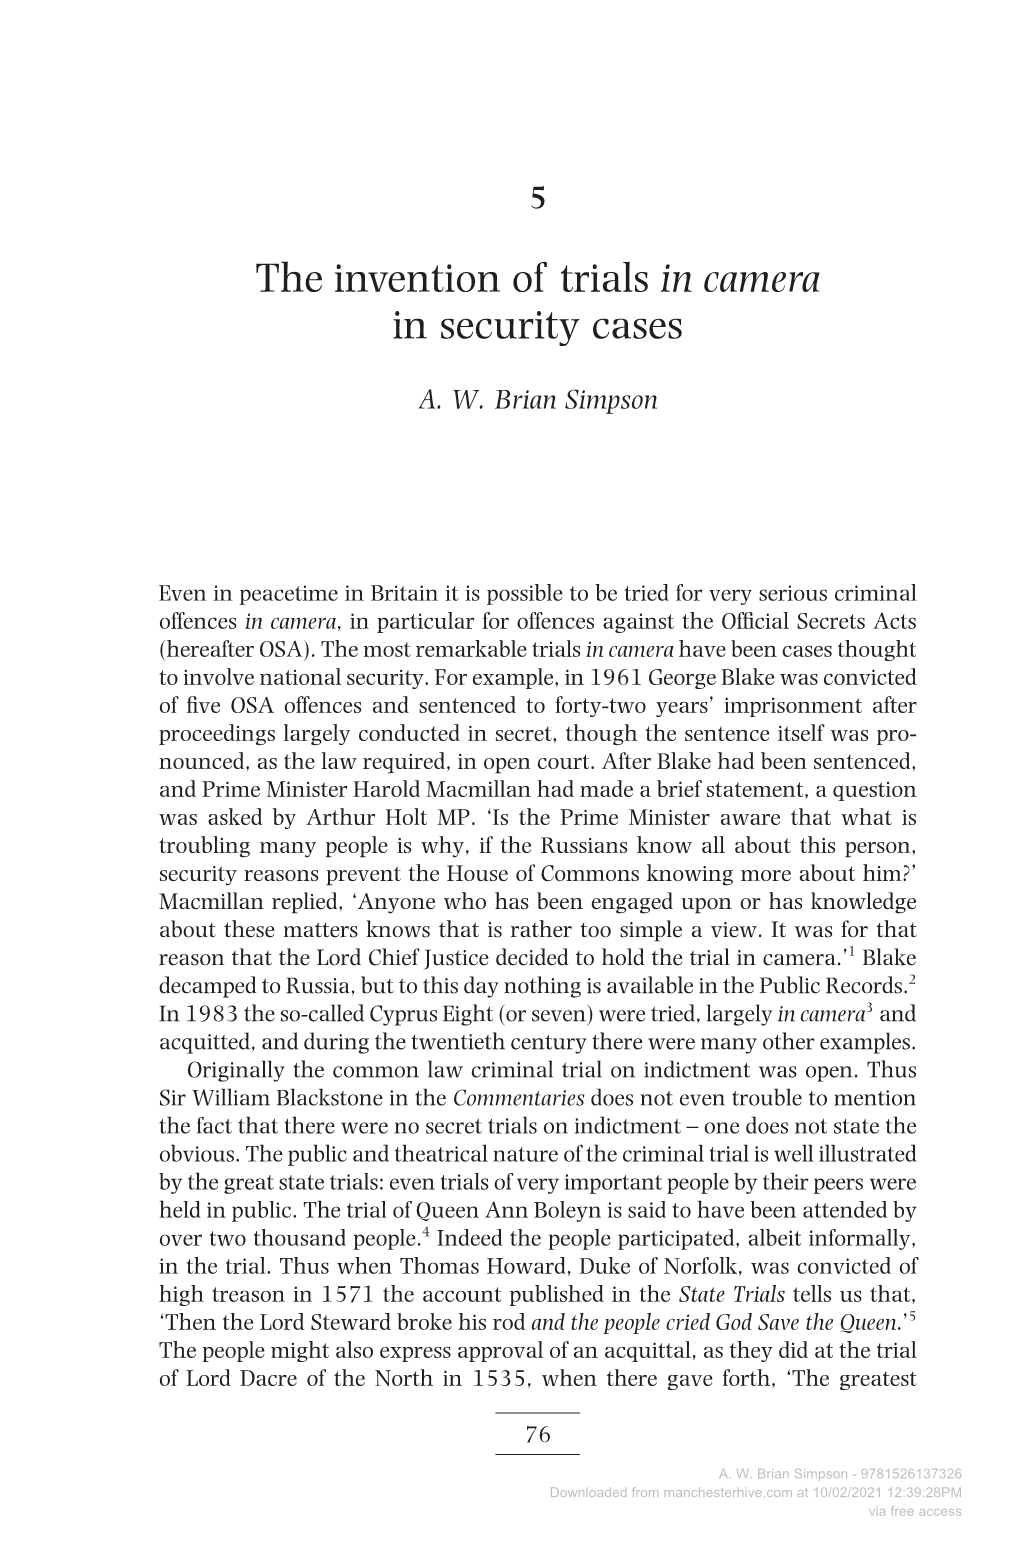 The Invention of Trials in Camera in Security Cases